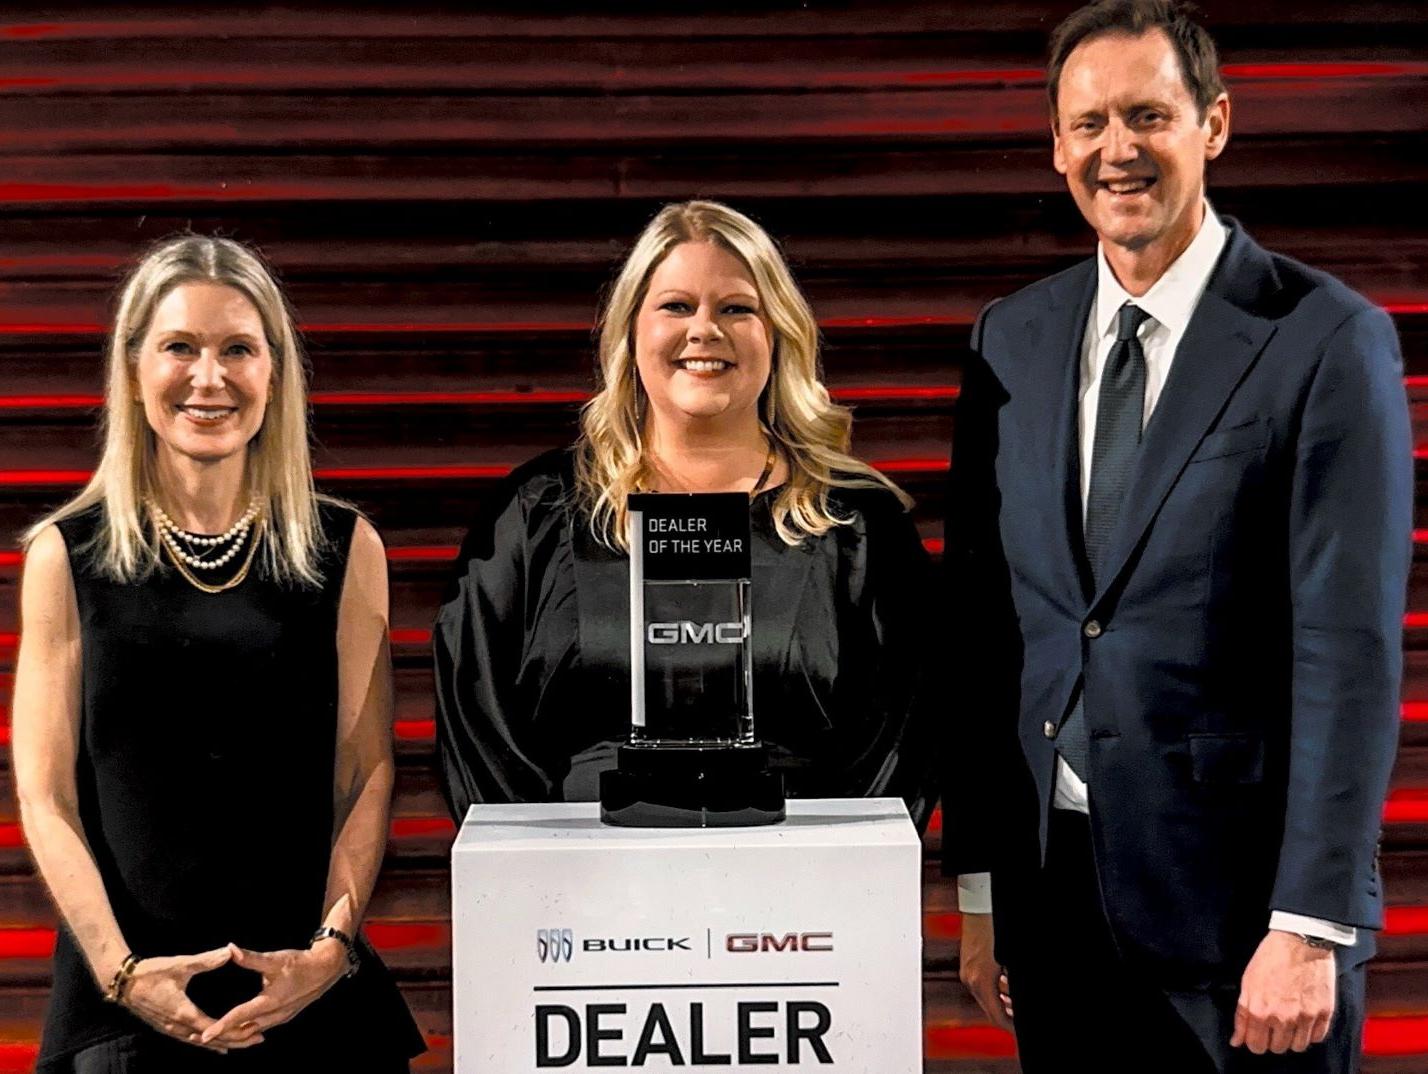 From left, Molly Peck, chief transformation officer, General Motors; Taylor Bentley Conner, general manager, Howard Bentley Buick GMC of Albertville; and Duncan Aldred, global vice president of Buick and GMC, in London on April 24 during the 2023 Dealer of the Year award presentation.